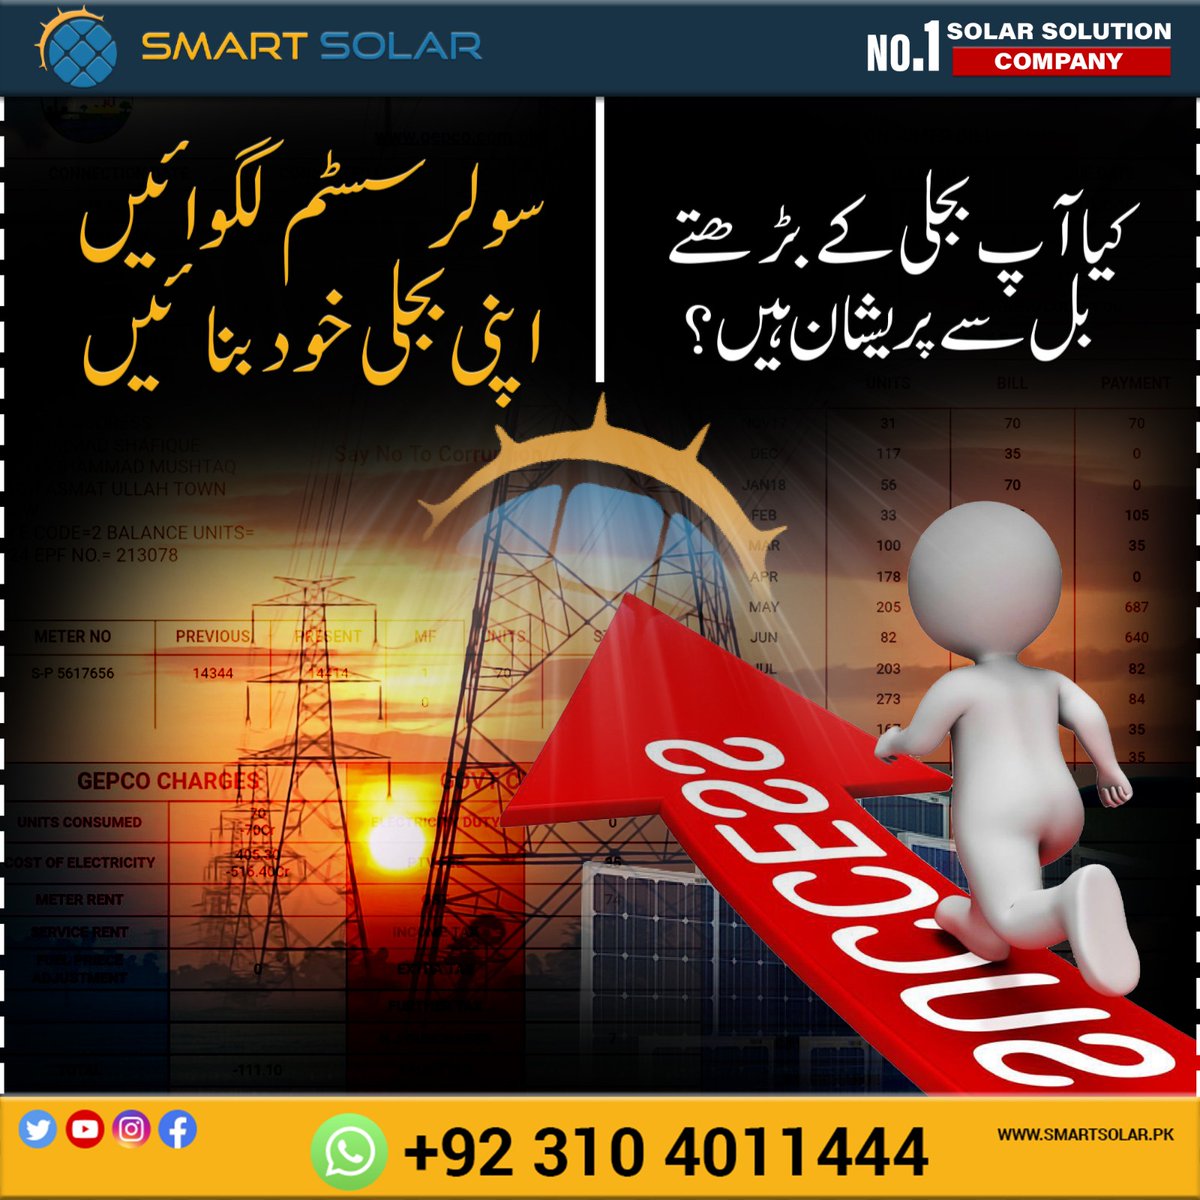 Generate solar energy on your RoofTop!
Switch to Solar Now:
For more details please contact 0311-4011444
#SmartSolar #Solar #SolarPanels #SolarBatteries #SolarInverters #SolarInstallation #SolarHeater